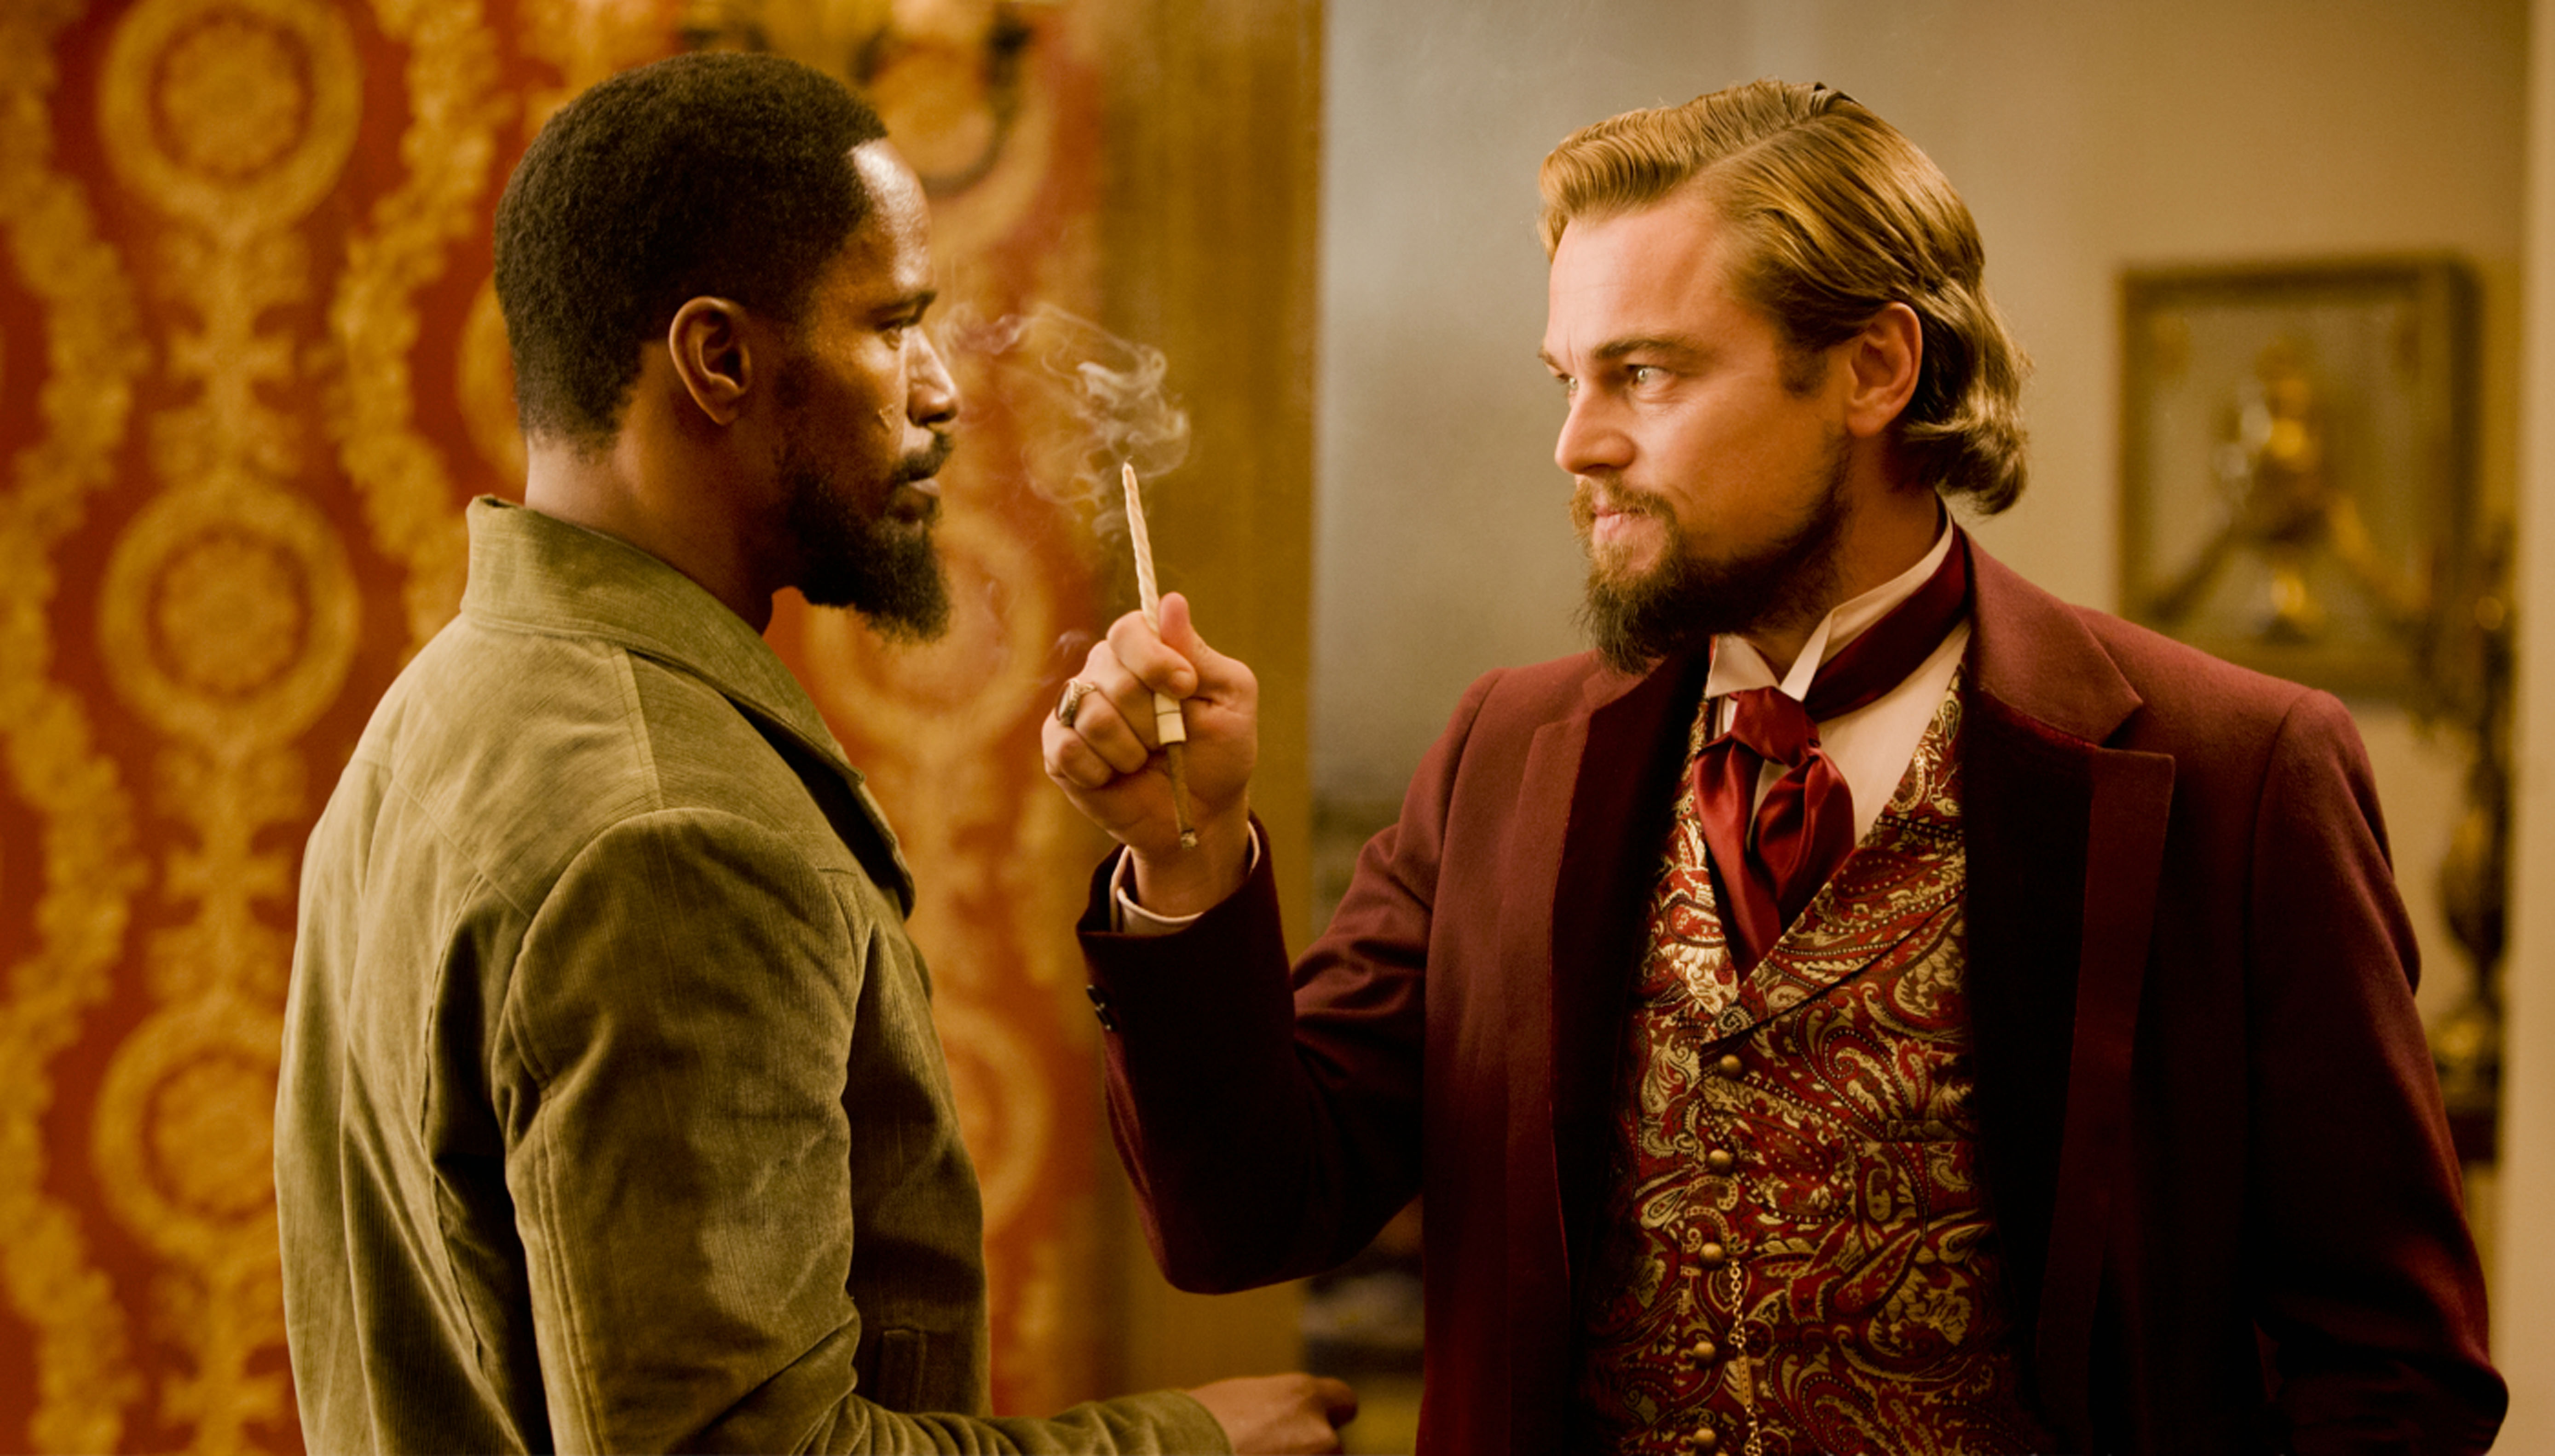 Django Unchained is a heroic love story